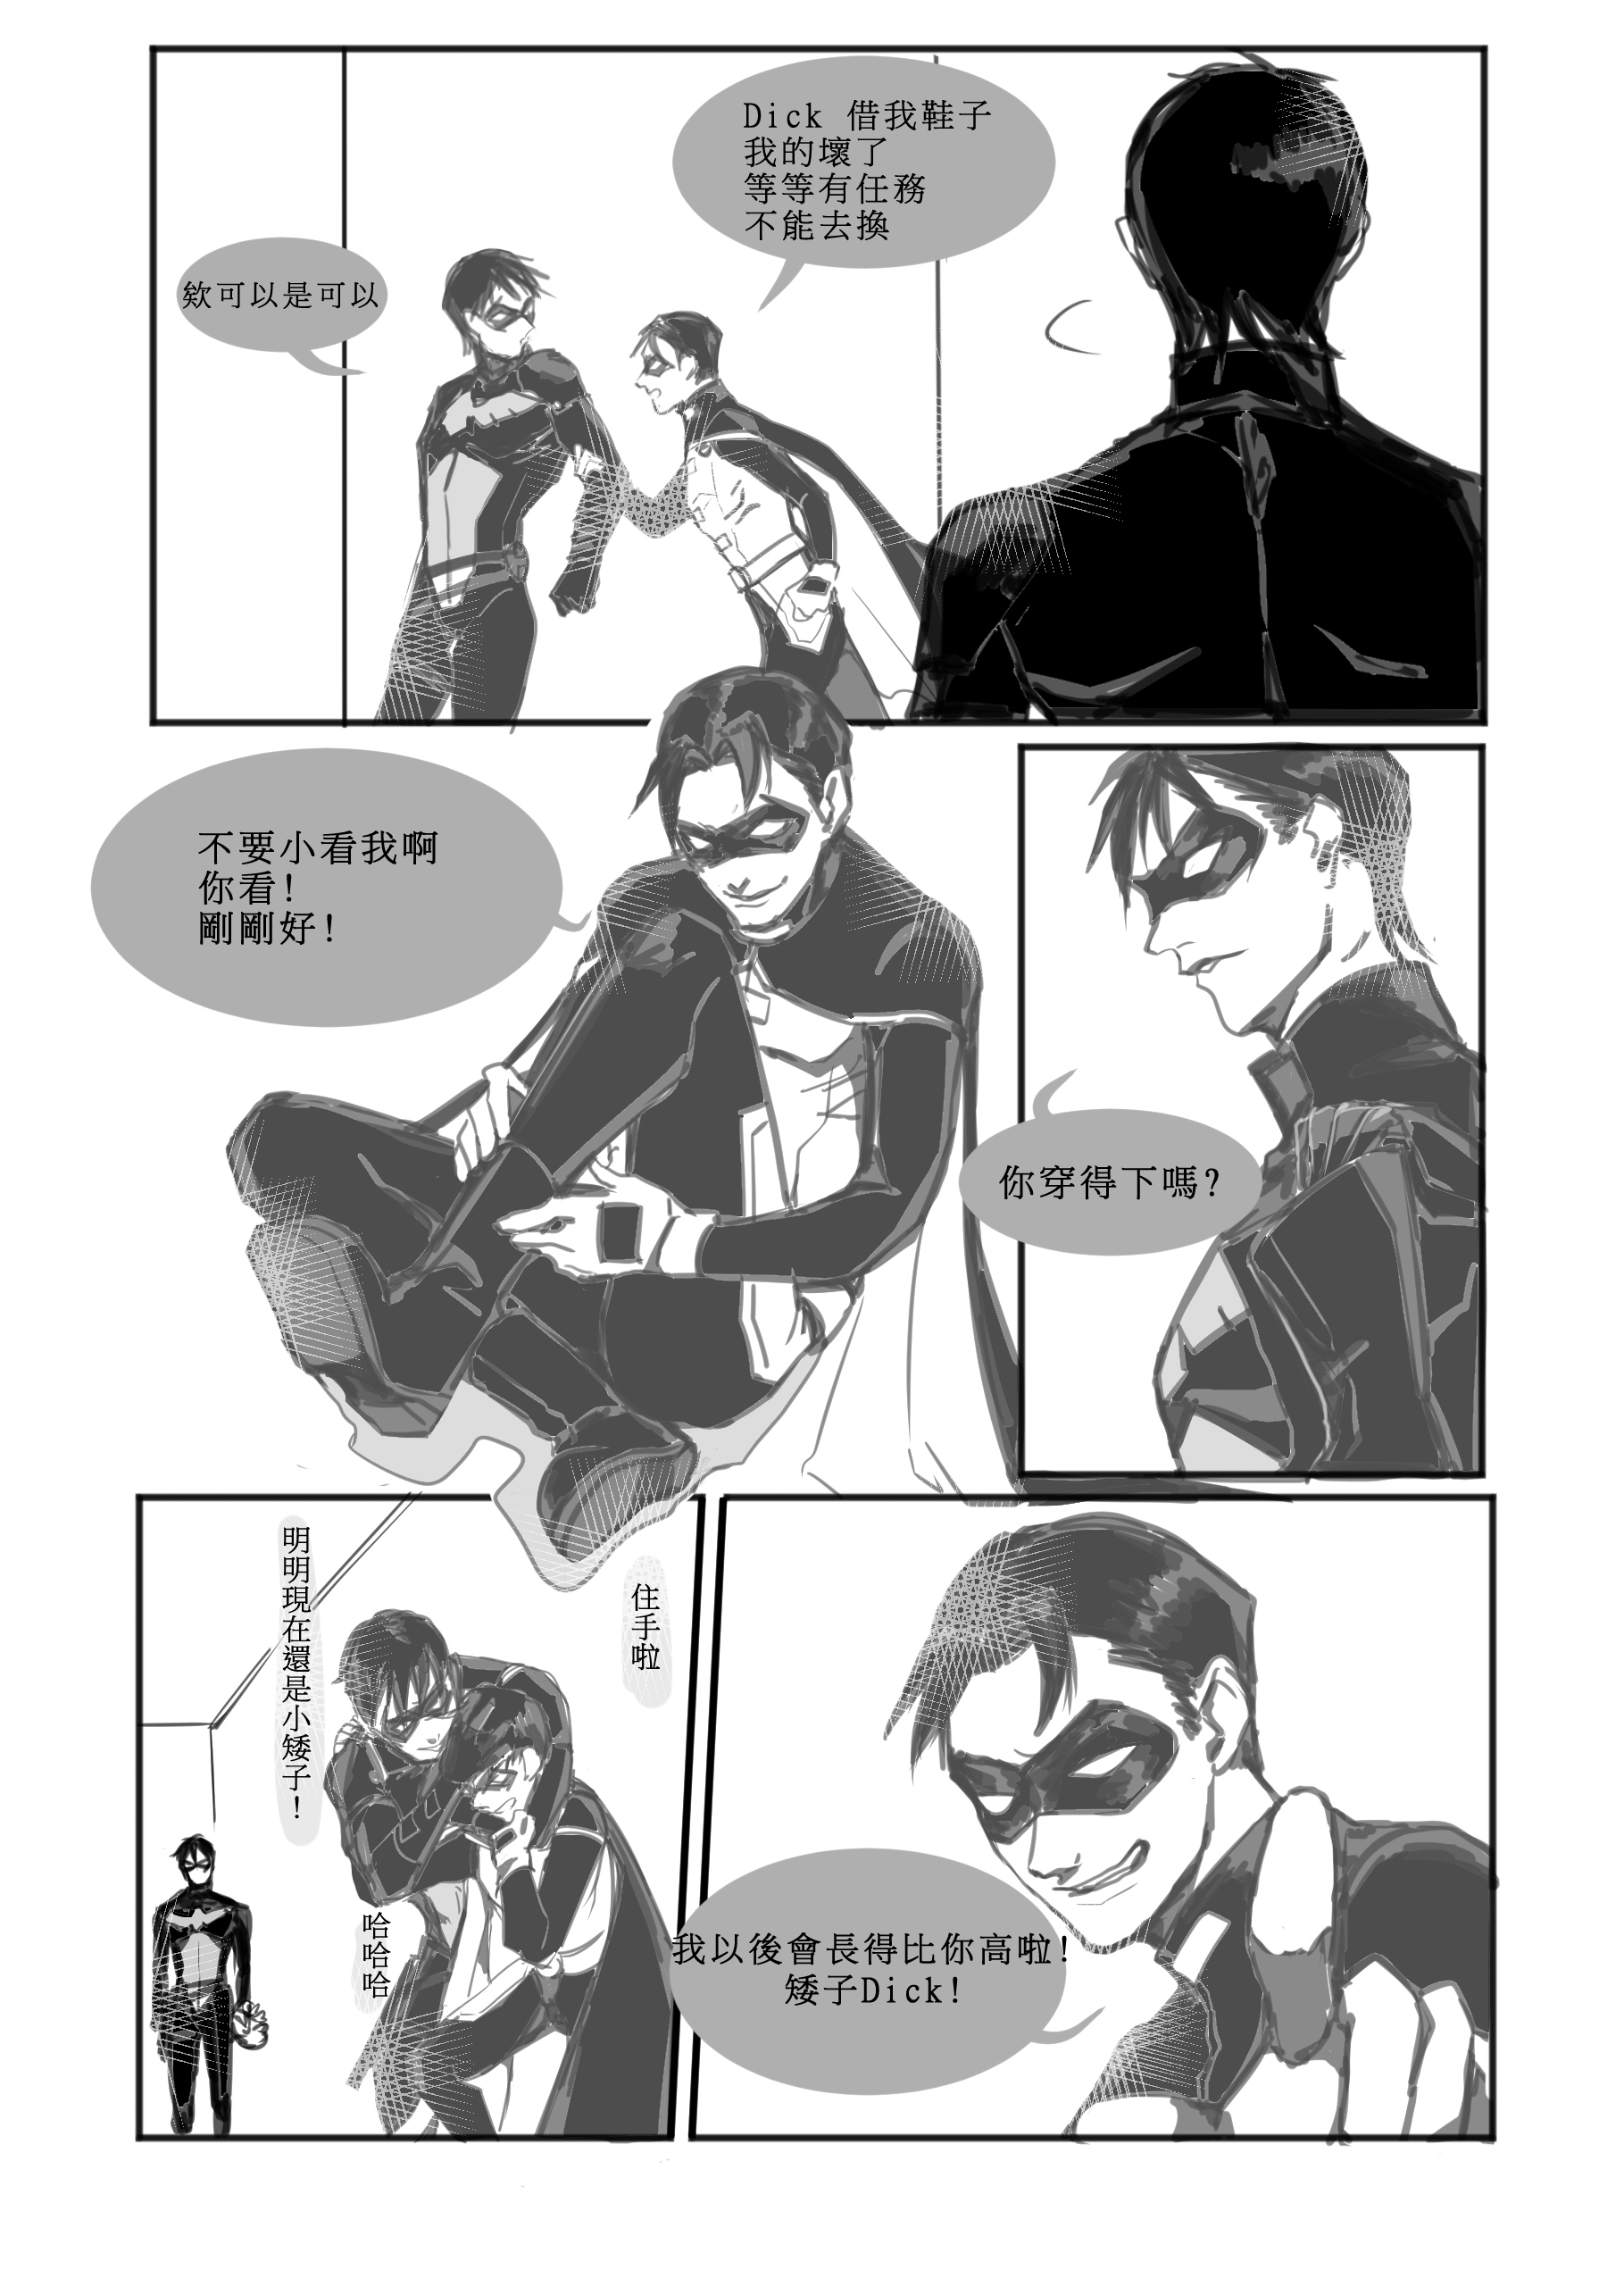 [DC][Jaydick]Long for You 試閱圖